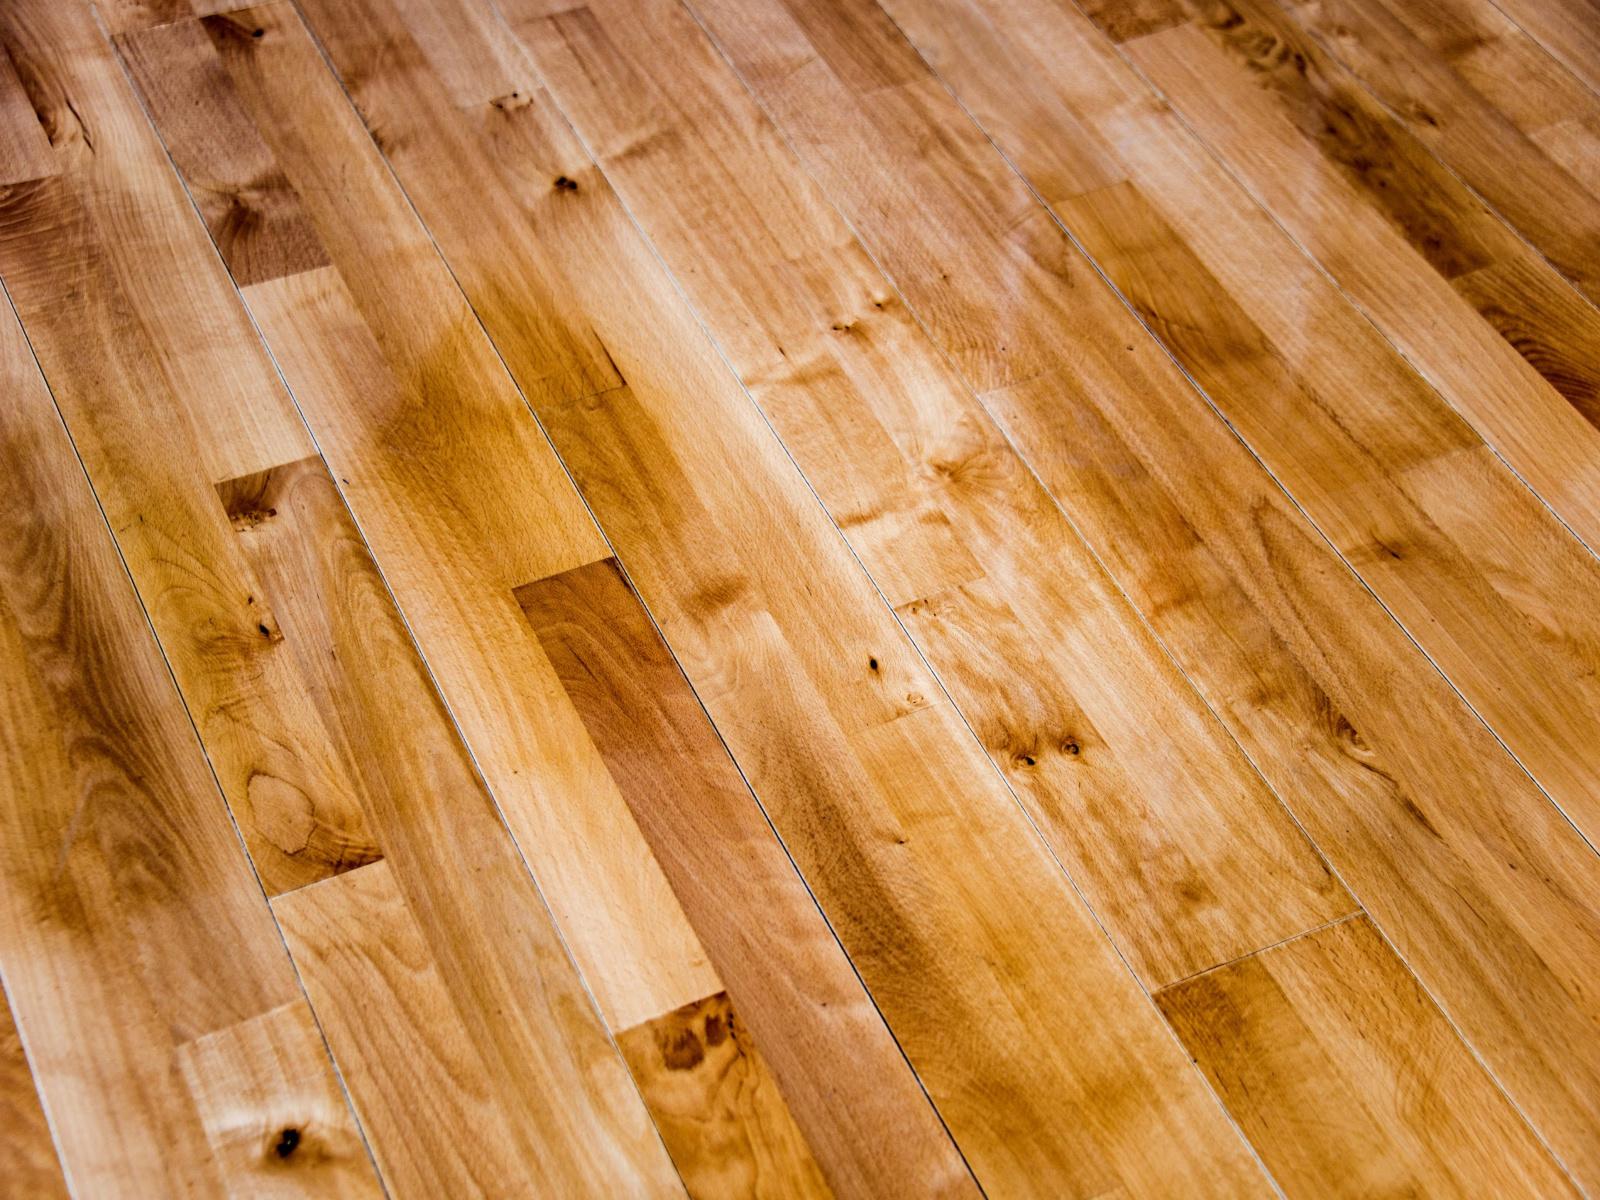 What’s the Difference Between Floor Waxing and Floor Buffing?